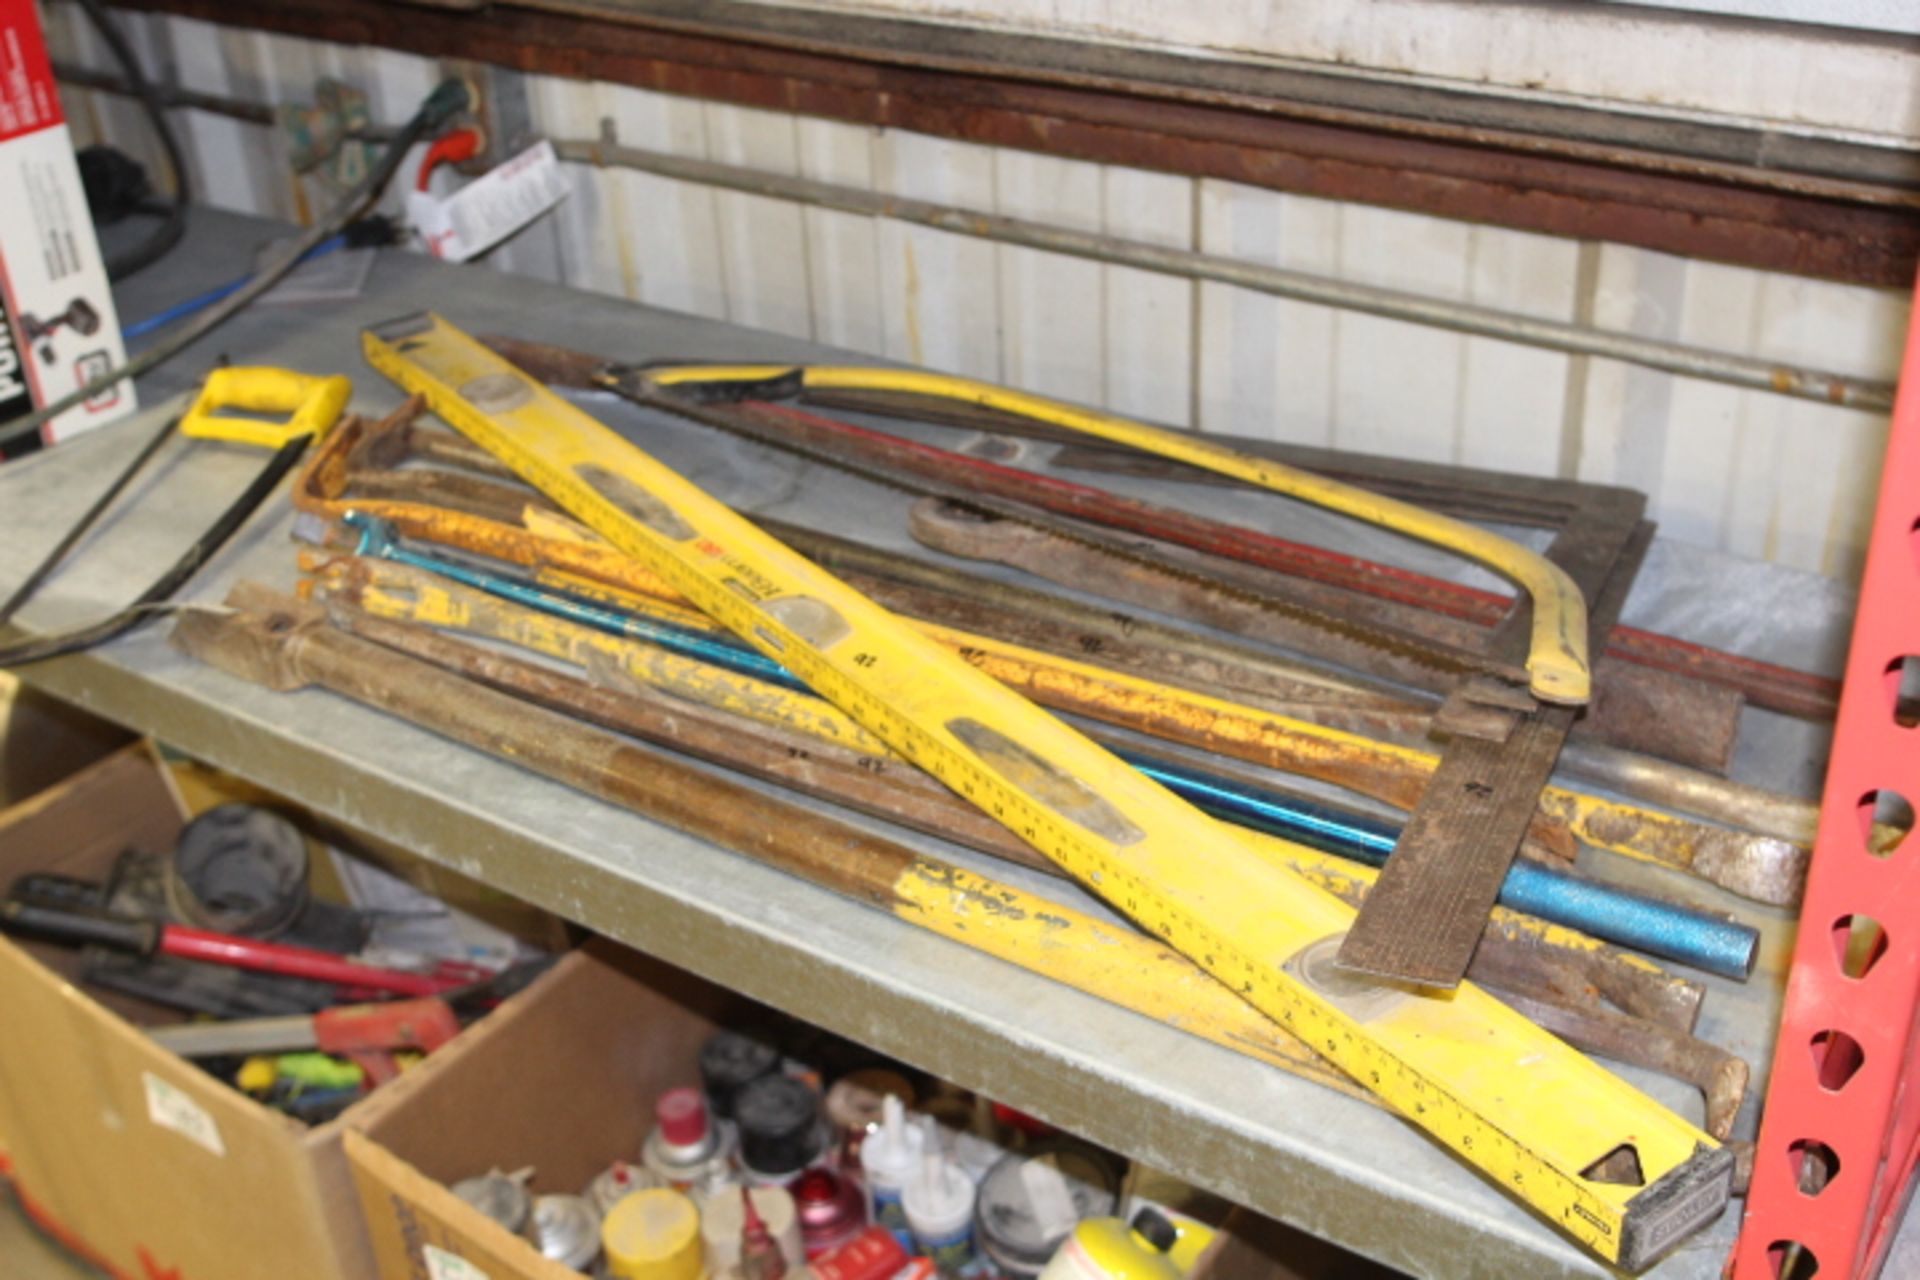 Lot of Misc. Hand Tools - Level, Squares, Saws, Wrecking Bars, Pry Bars, Etc - Image 3 of 3